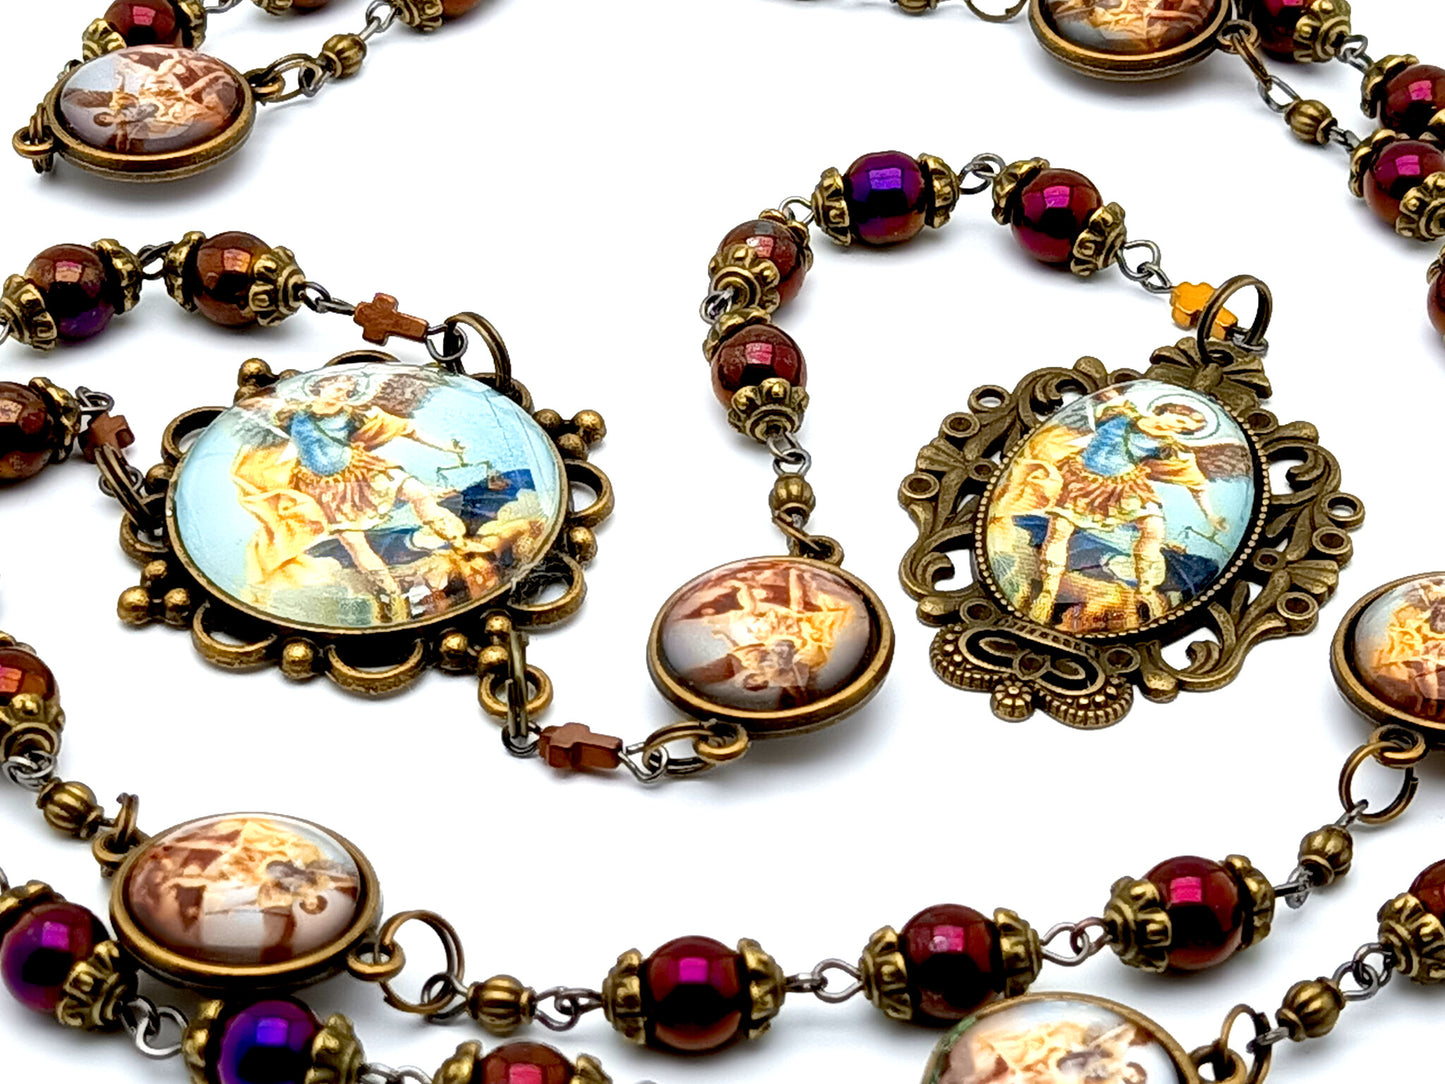 Vintage style Saint Michael unique rosary beads prayer chaplet with hematite gemstone beads and double sided domed picture medals.